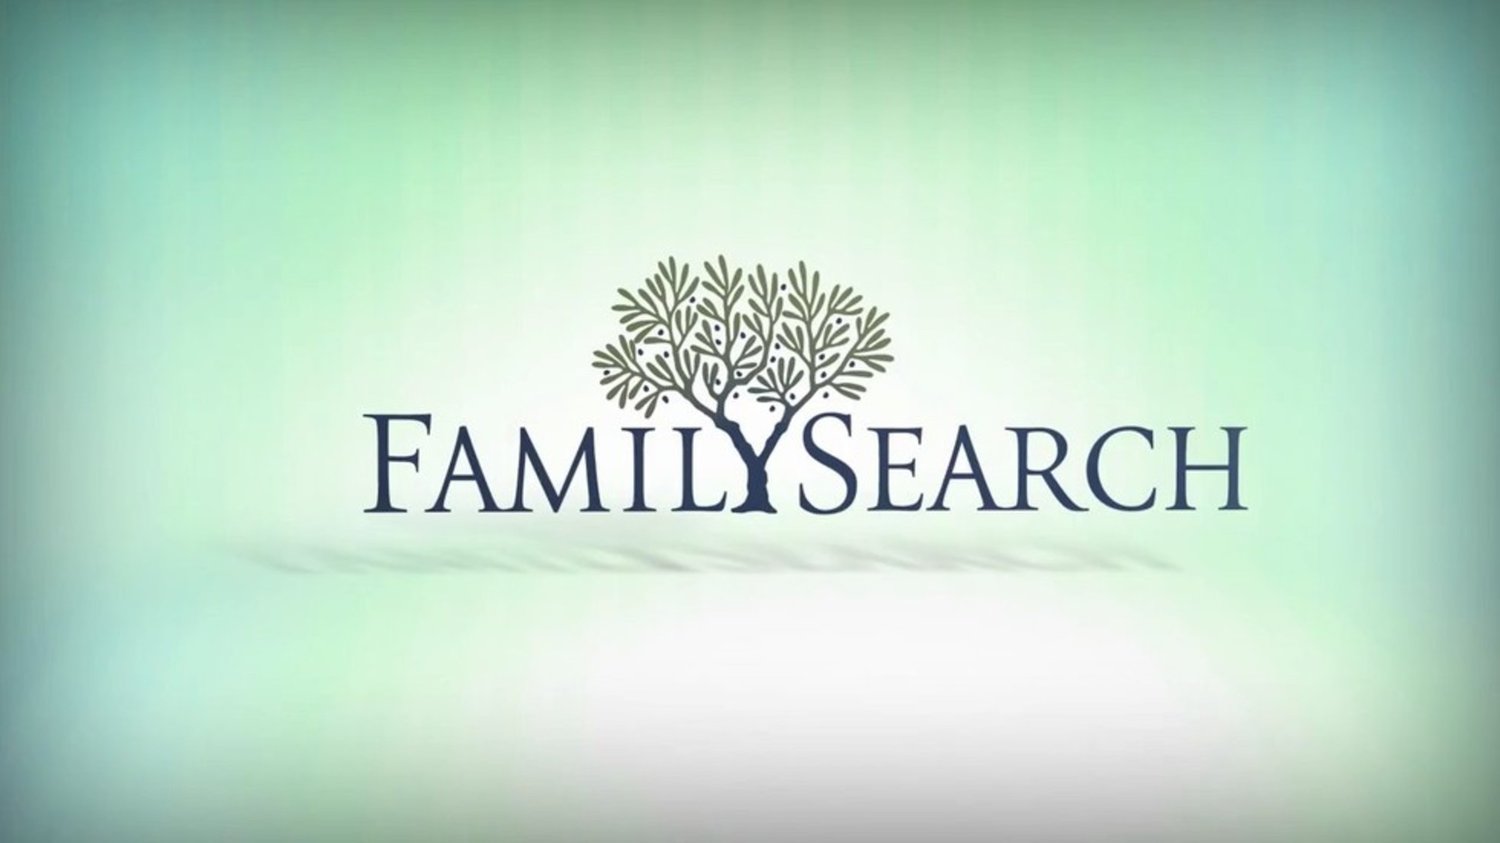 LDS+News+family+search.jpg